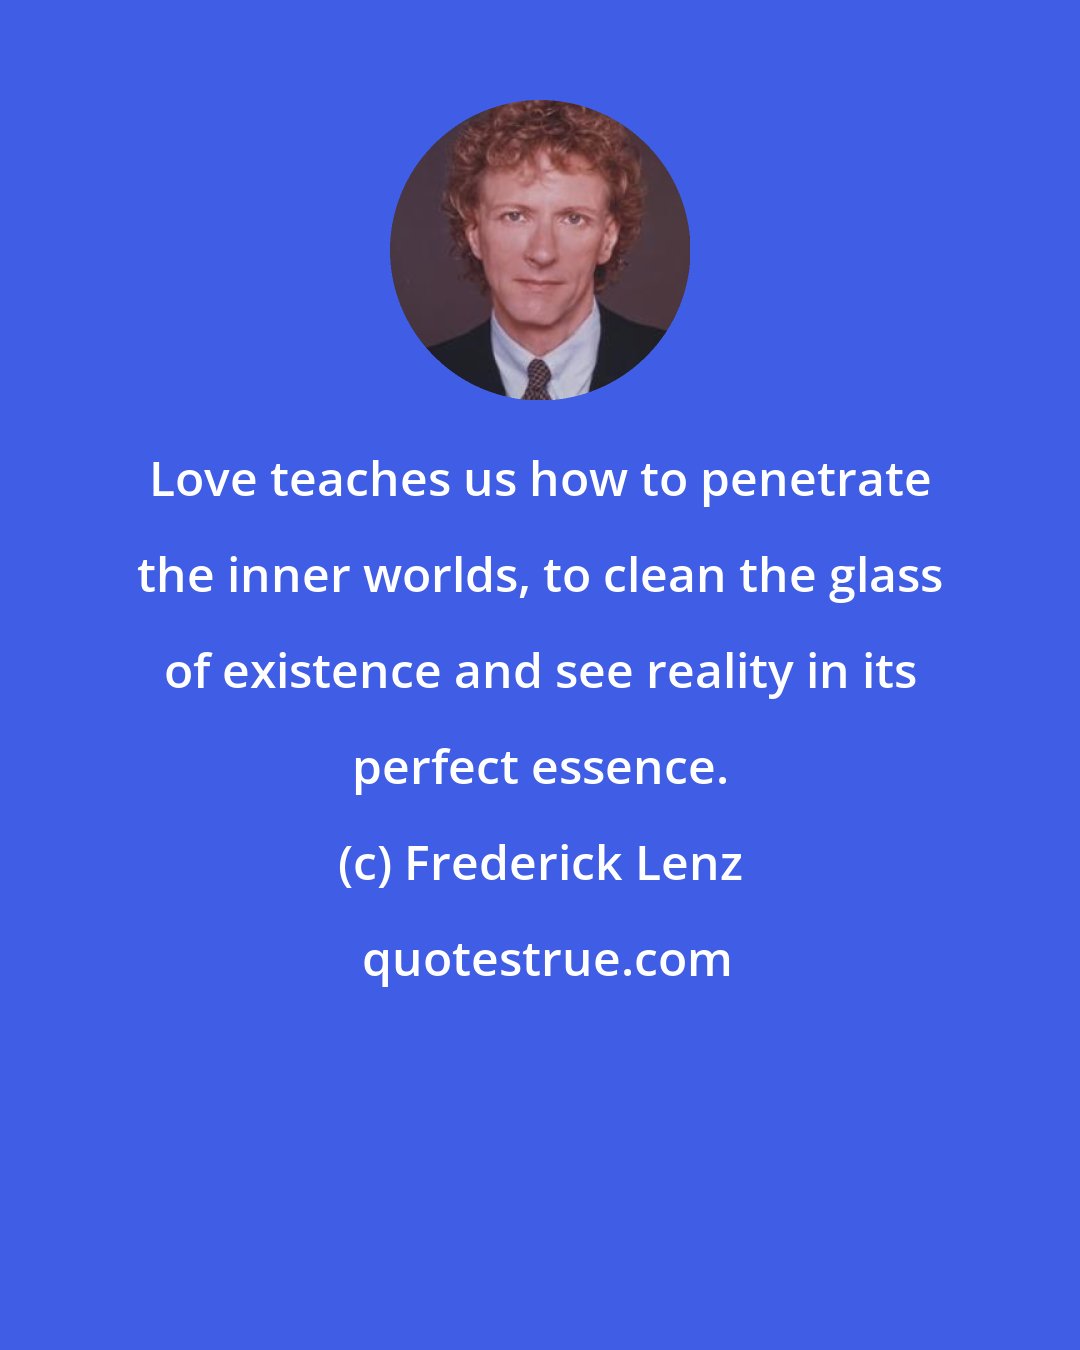 Frederick Lenz: Love teaches us how to penetrate the inner worlds, to clean the glass of existence and see reality in its perfect essence.